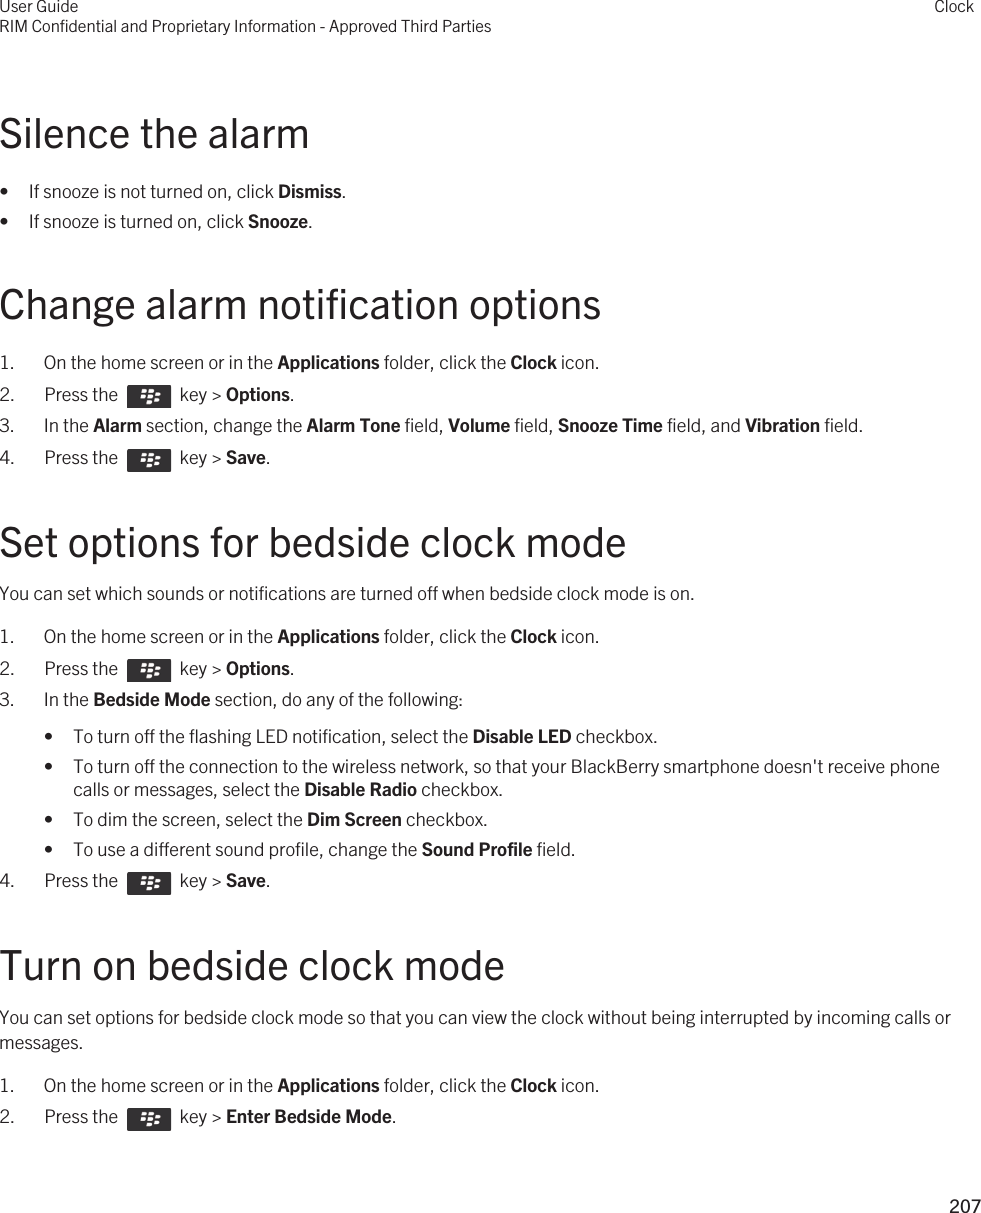 Silence the alarm• If snooze is not turned on, click Dismiss.• If snooze is turned on, click Snooze.Change alarm notification options1. On the home screen or in the Applications folder, click the Clock icon.2.  Press the    key &gt; Options. 3. In the Alarm section, change the Alarm Tone field, Volume field, Snooze Time field, and Vibration field.4.  Press the    key &gt; Save. Set options for bedside clock modeYou can set which sounds or notifications are turned off when bedside clock mode is on.1. On the home screen or in the Applications folder, click the Clock icon.2.  Press the    key &gt; Options. 3. In the Bedside Mode section, do any of the following:• To turn off the flashing LED notification, select the Disable LED checkbox.• To turn off the connection to the wireless network, so that your BlackBerry smartphone doesn&apos;t receive phone calls or messages, select the Disable Radio checkbox.• To dim the screen, select the Dim Screen checkbox.• To use a different sound profile, change the Sound Profile field.4.  Press the    key &gt; Save. Turn on bedside clock modeYou can set options for bedside clock mode so that you can view the clock without being interrupted by incoming calls or messages.1. On the home screen or in the Applications folder, click the Clock icon.2.  Press the    key &gt; Enter Bedside Mode.User GuideRIM Confidential and Proprietary Information - Approved Third PartiesClock207 